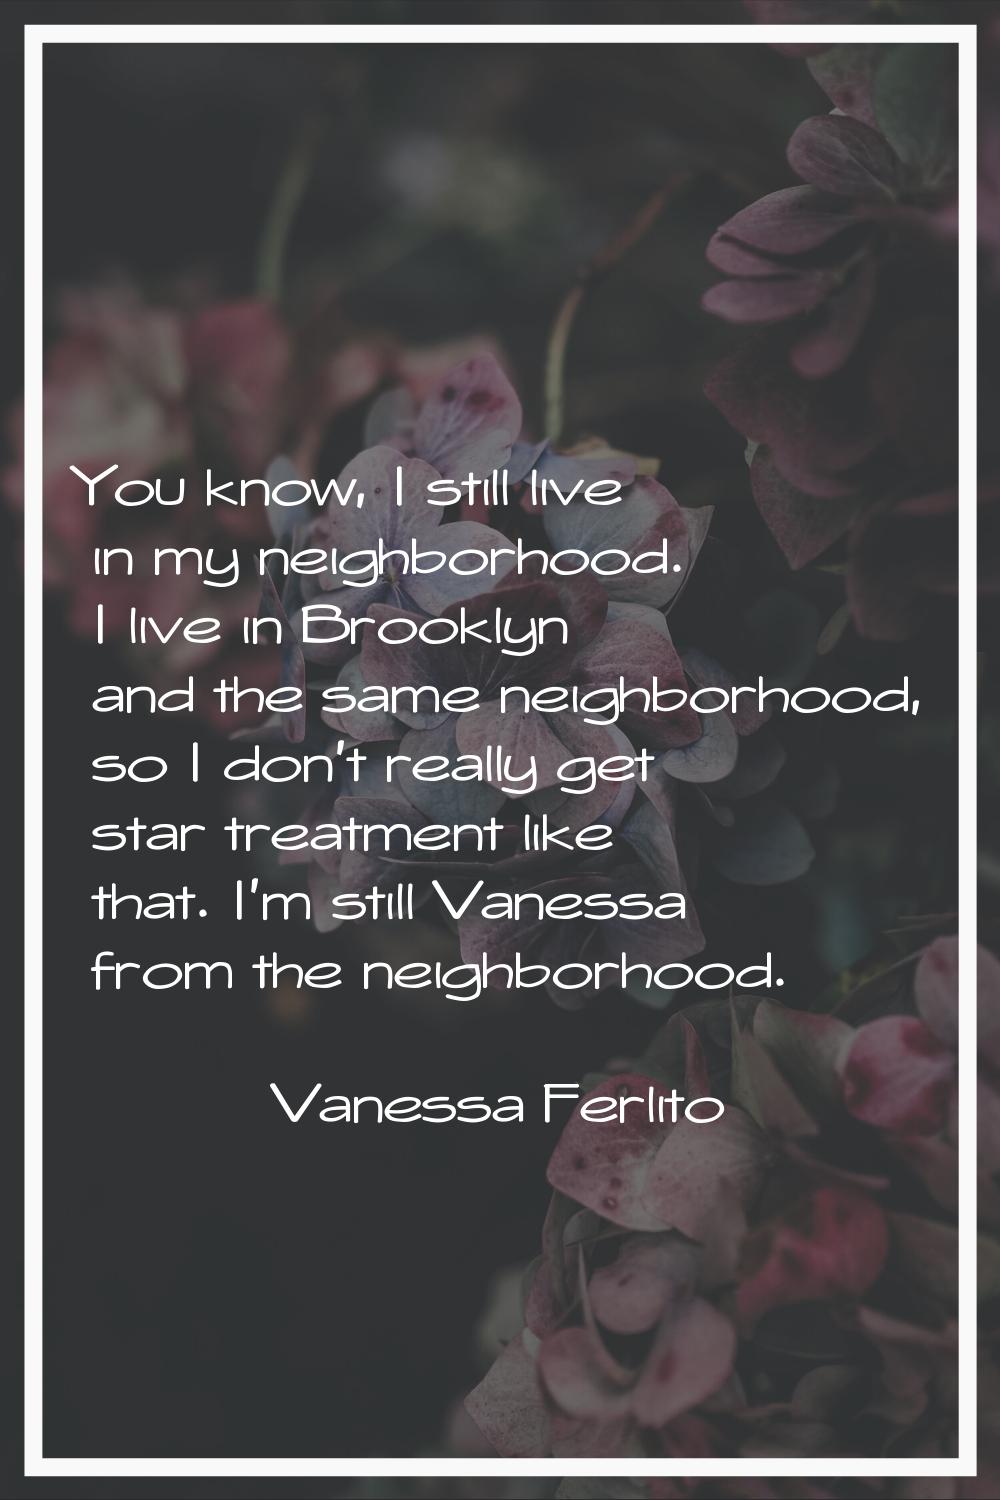 You know, I still live in my neighborhood. I live in Brooklyn and the same neighborhood, so I don't